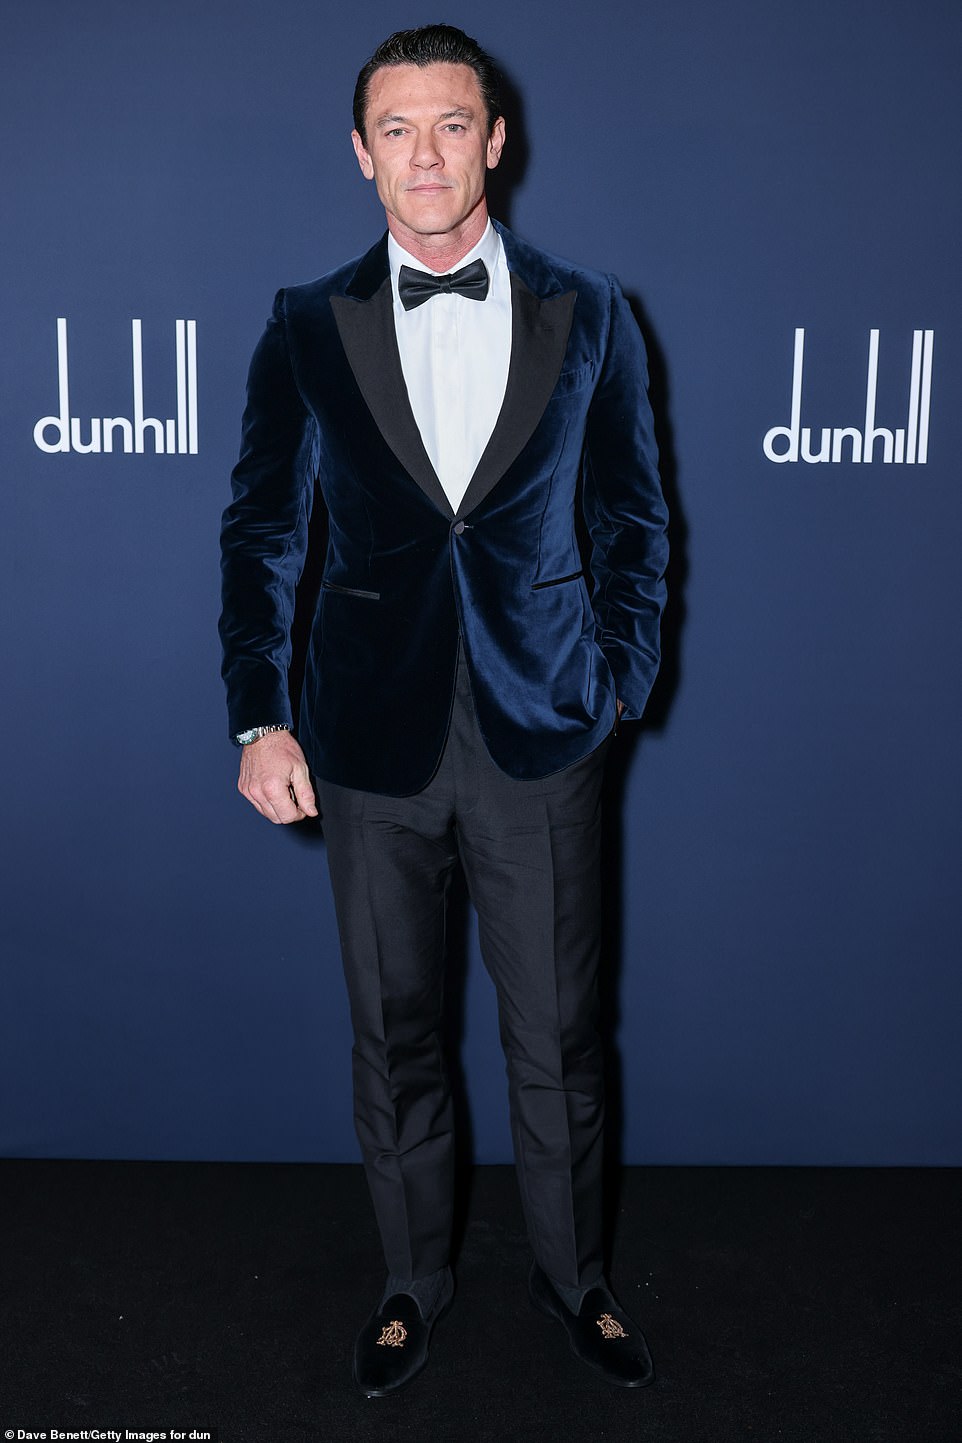 Luke Evans looked dapper in a navy velvet jacket which he paired with black trousers, a matching bow tie and a white shirt.